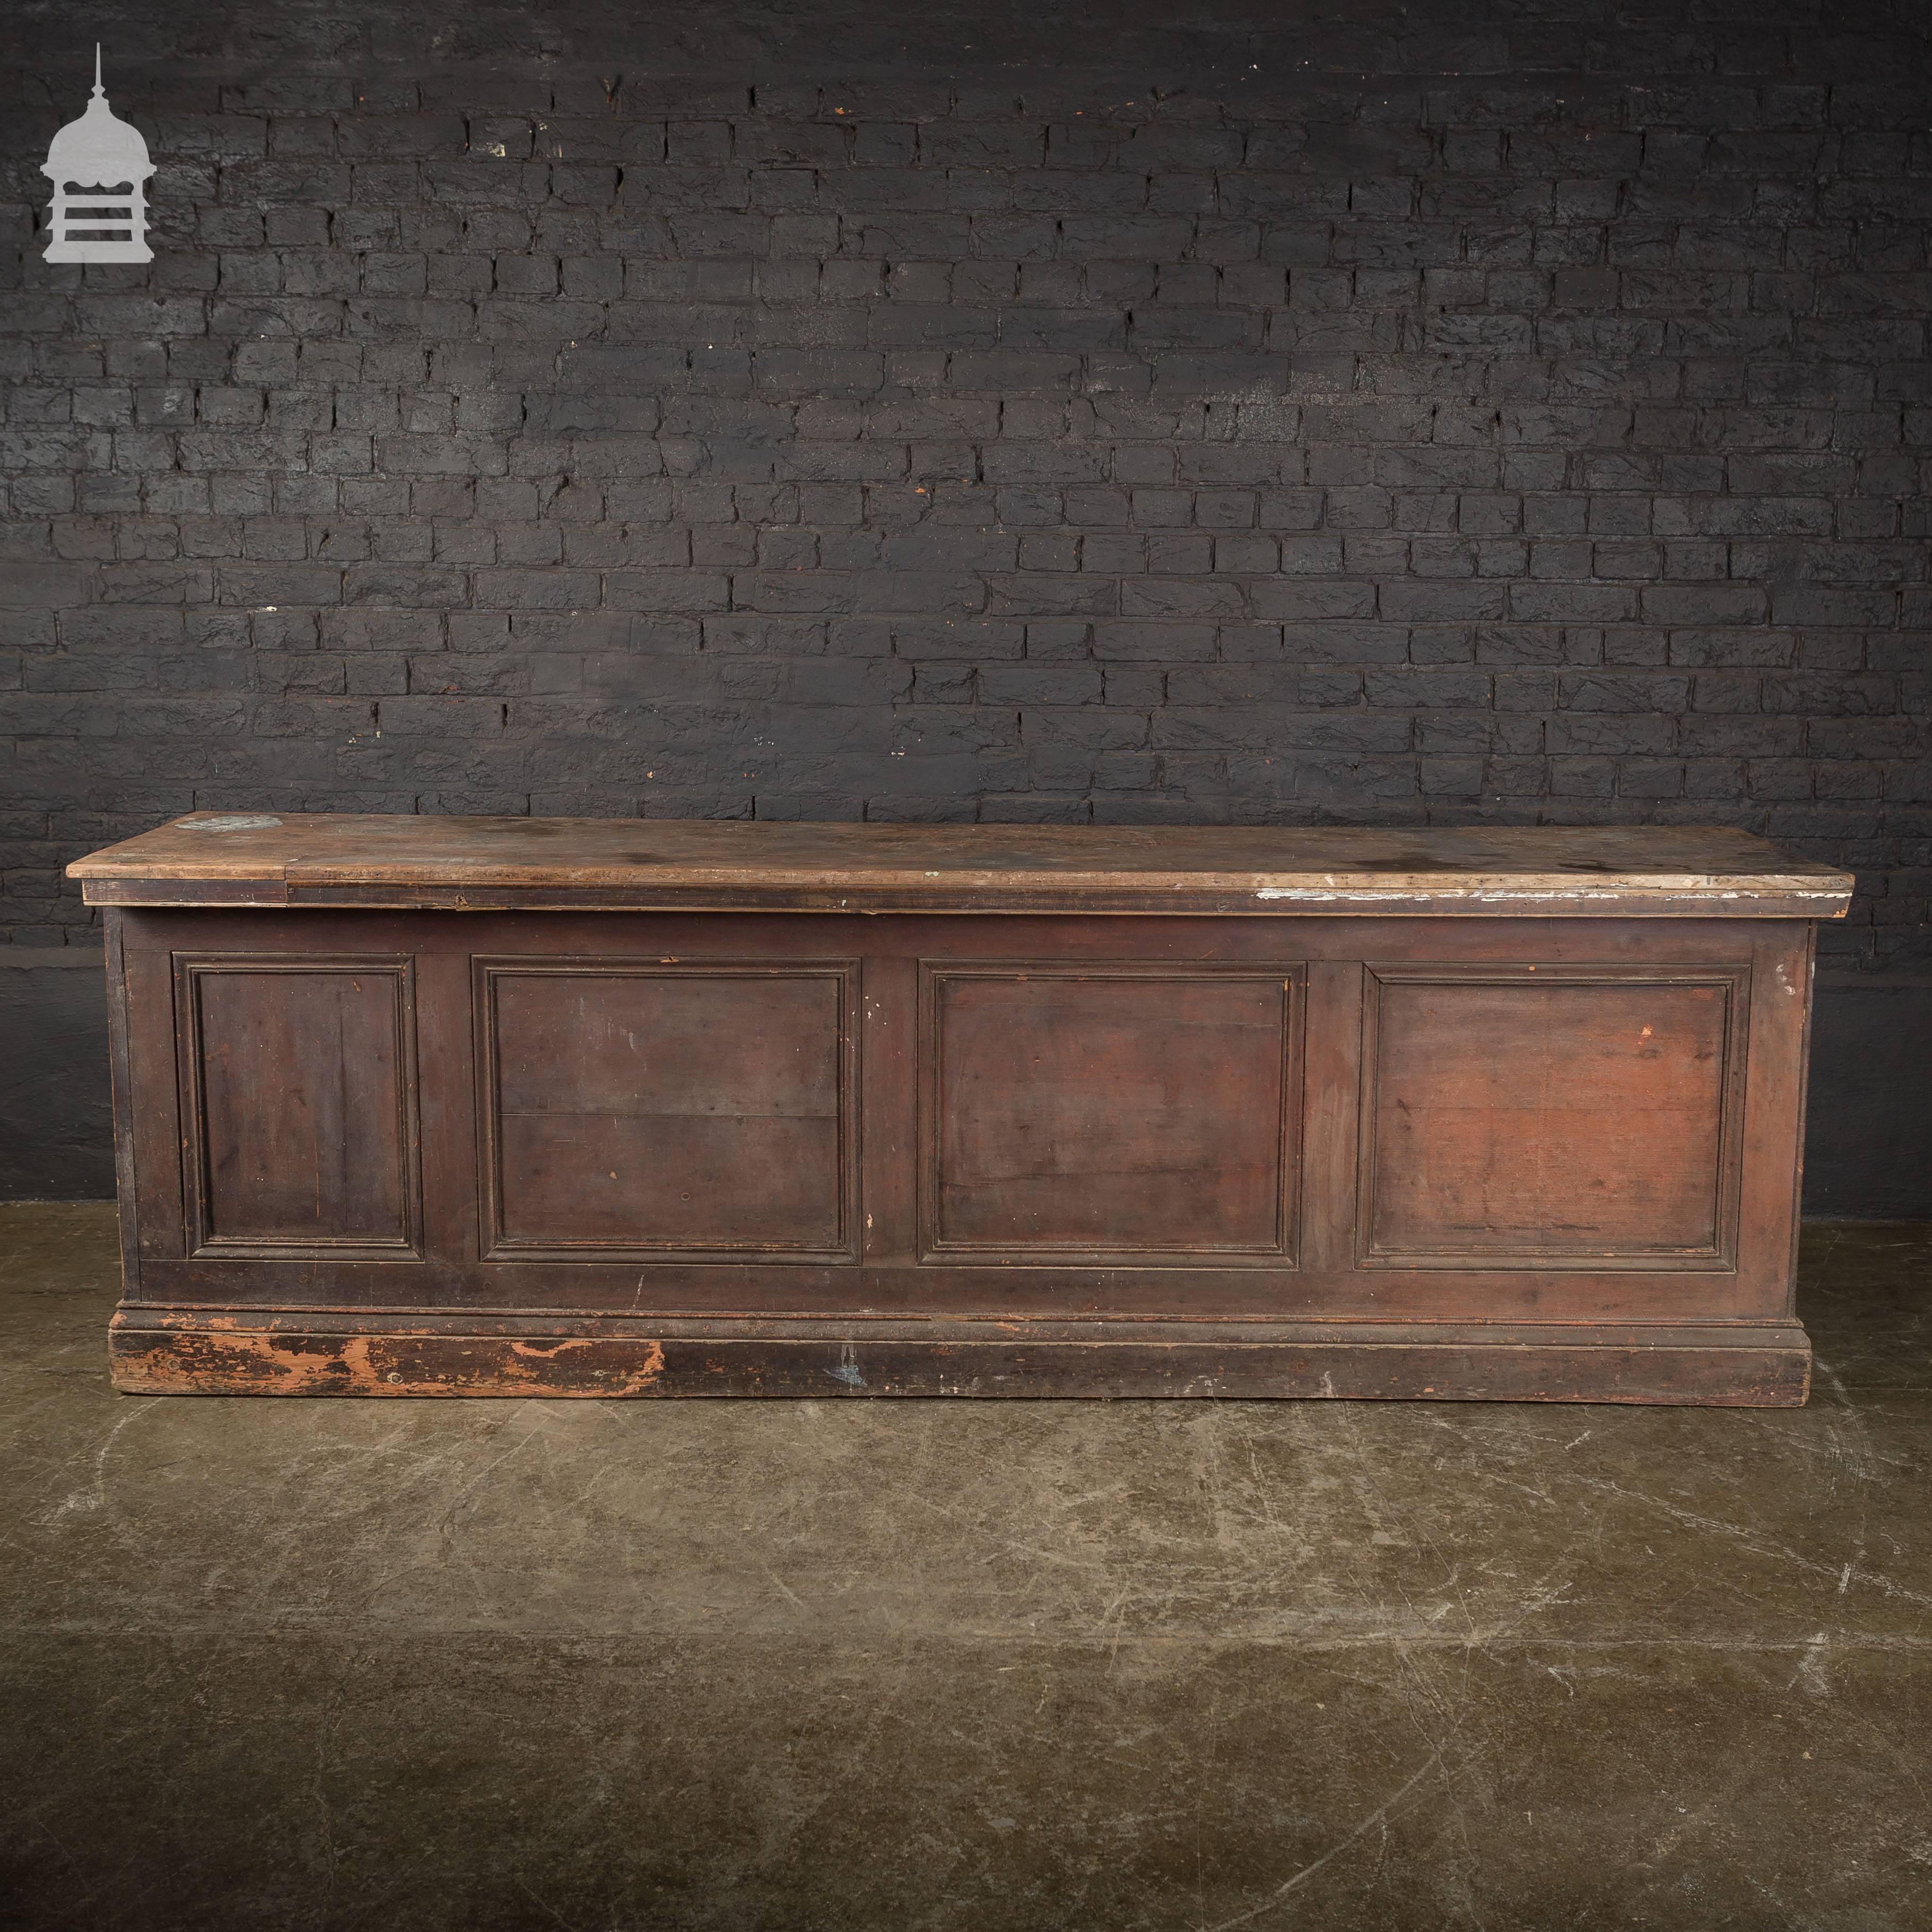 19th century pine haberdashery shop counter with mahogany top and distressed paint finish.